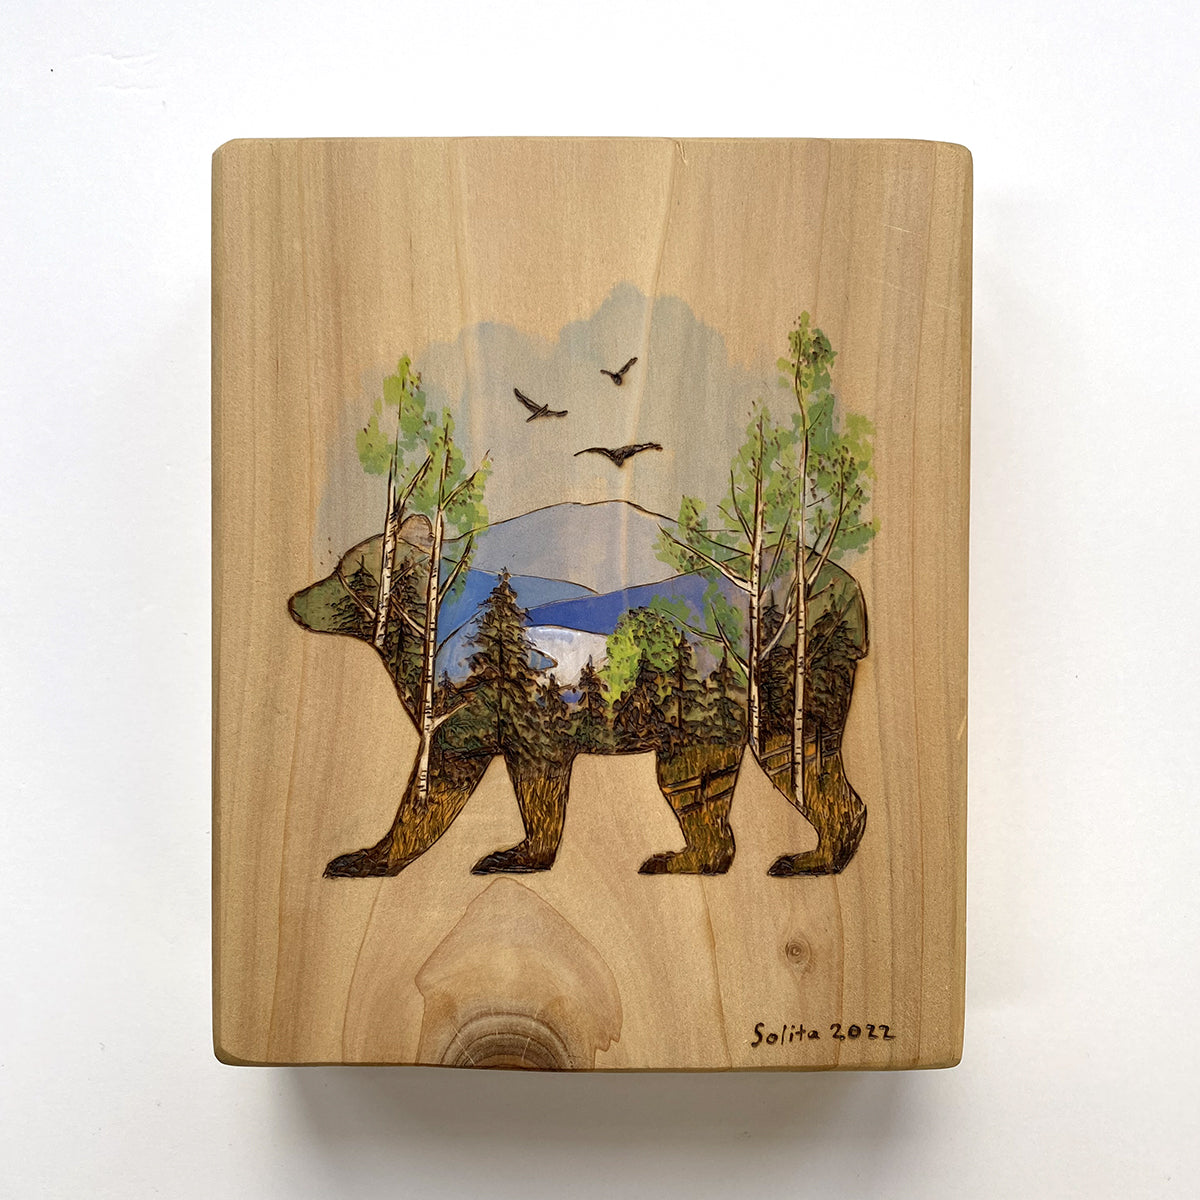 Original wood burned and hand painted art featuring landscape of scene of Mount Sentinel inside a bear